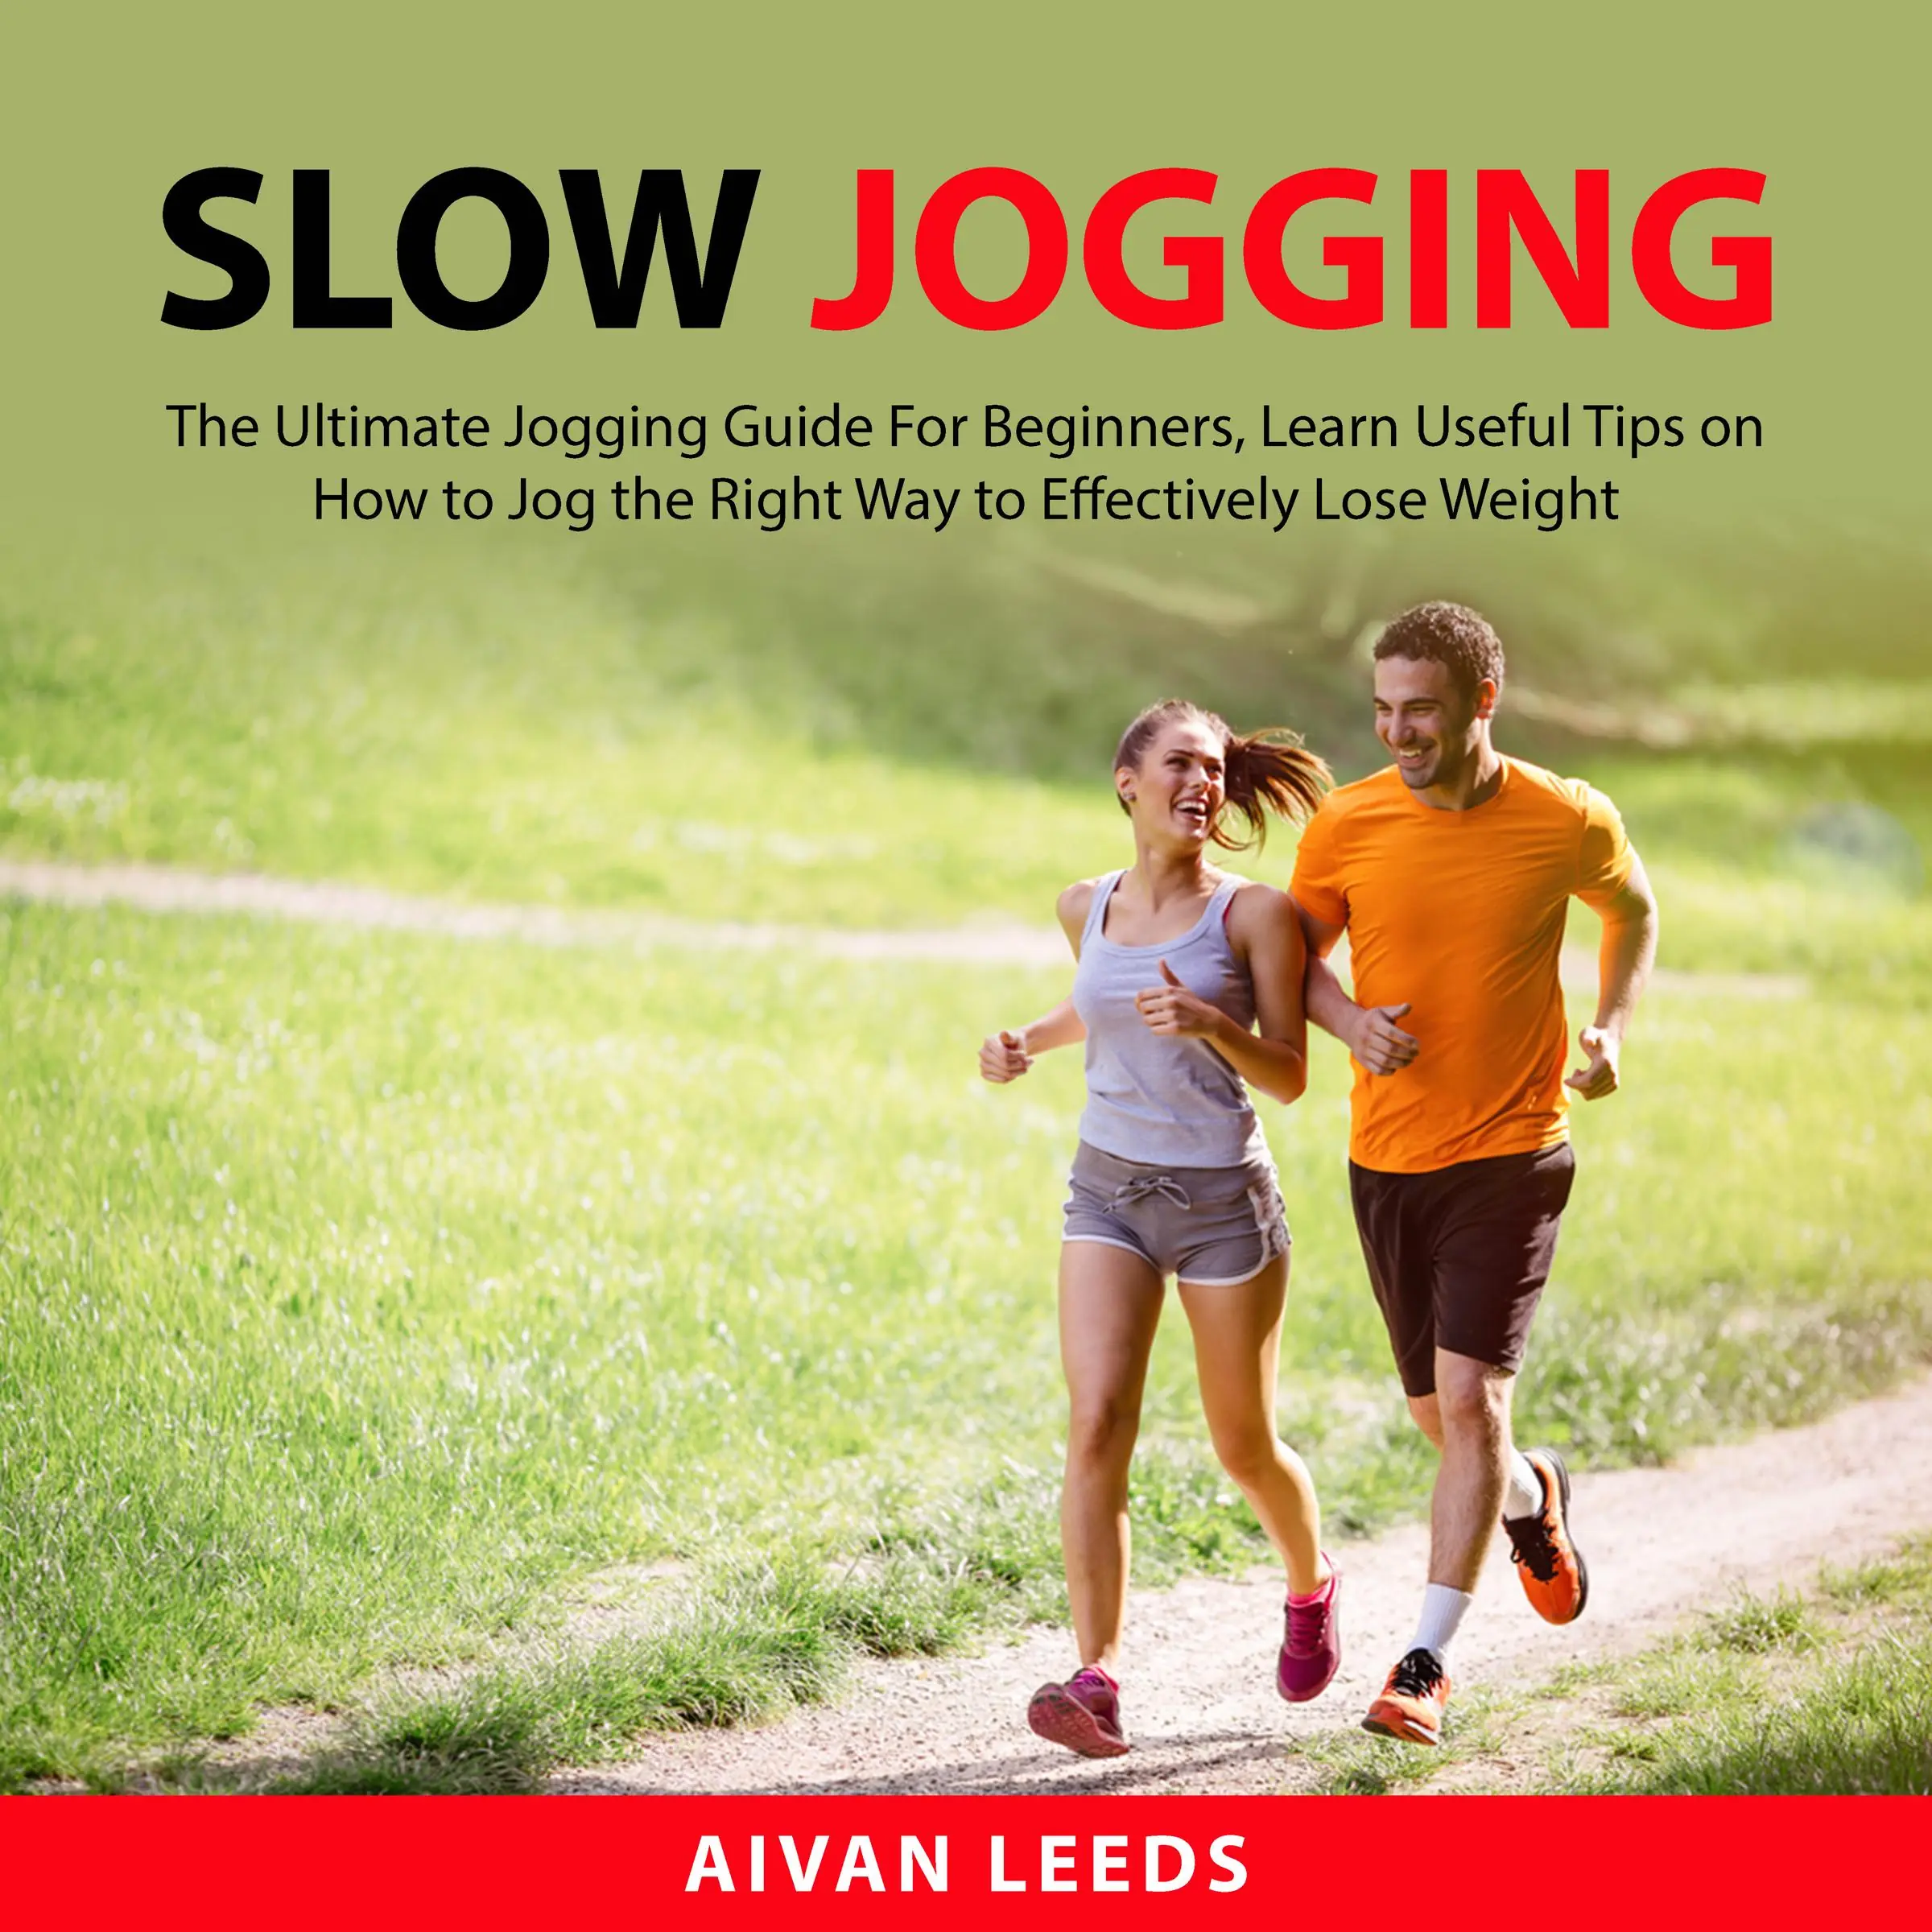 Slow Jogging: The Ultimate Jogging Guide For Beginners, Learn Useful Tips on How to Jog the Right Way to Effectily Lose Weight Audiobook by Aivan Leeds